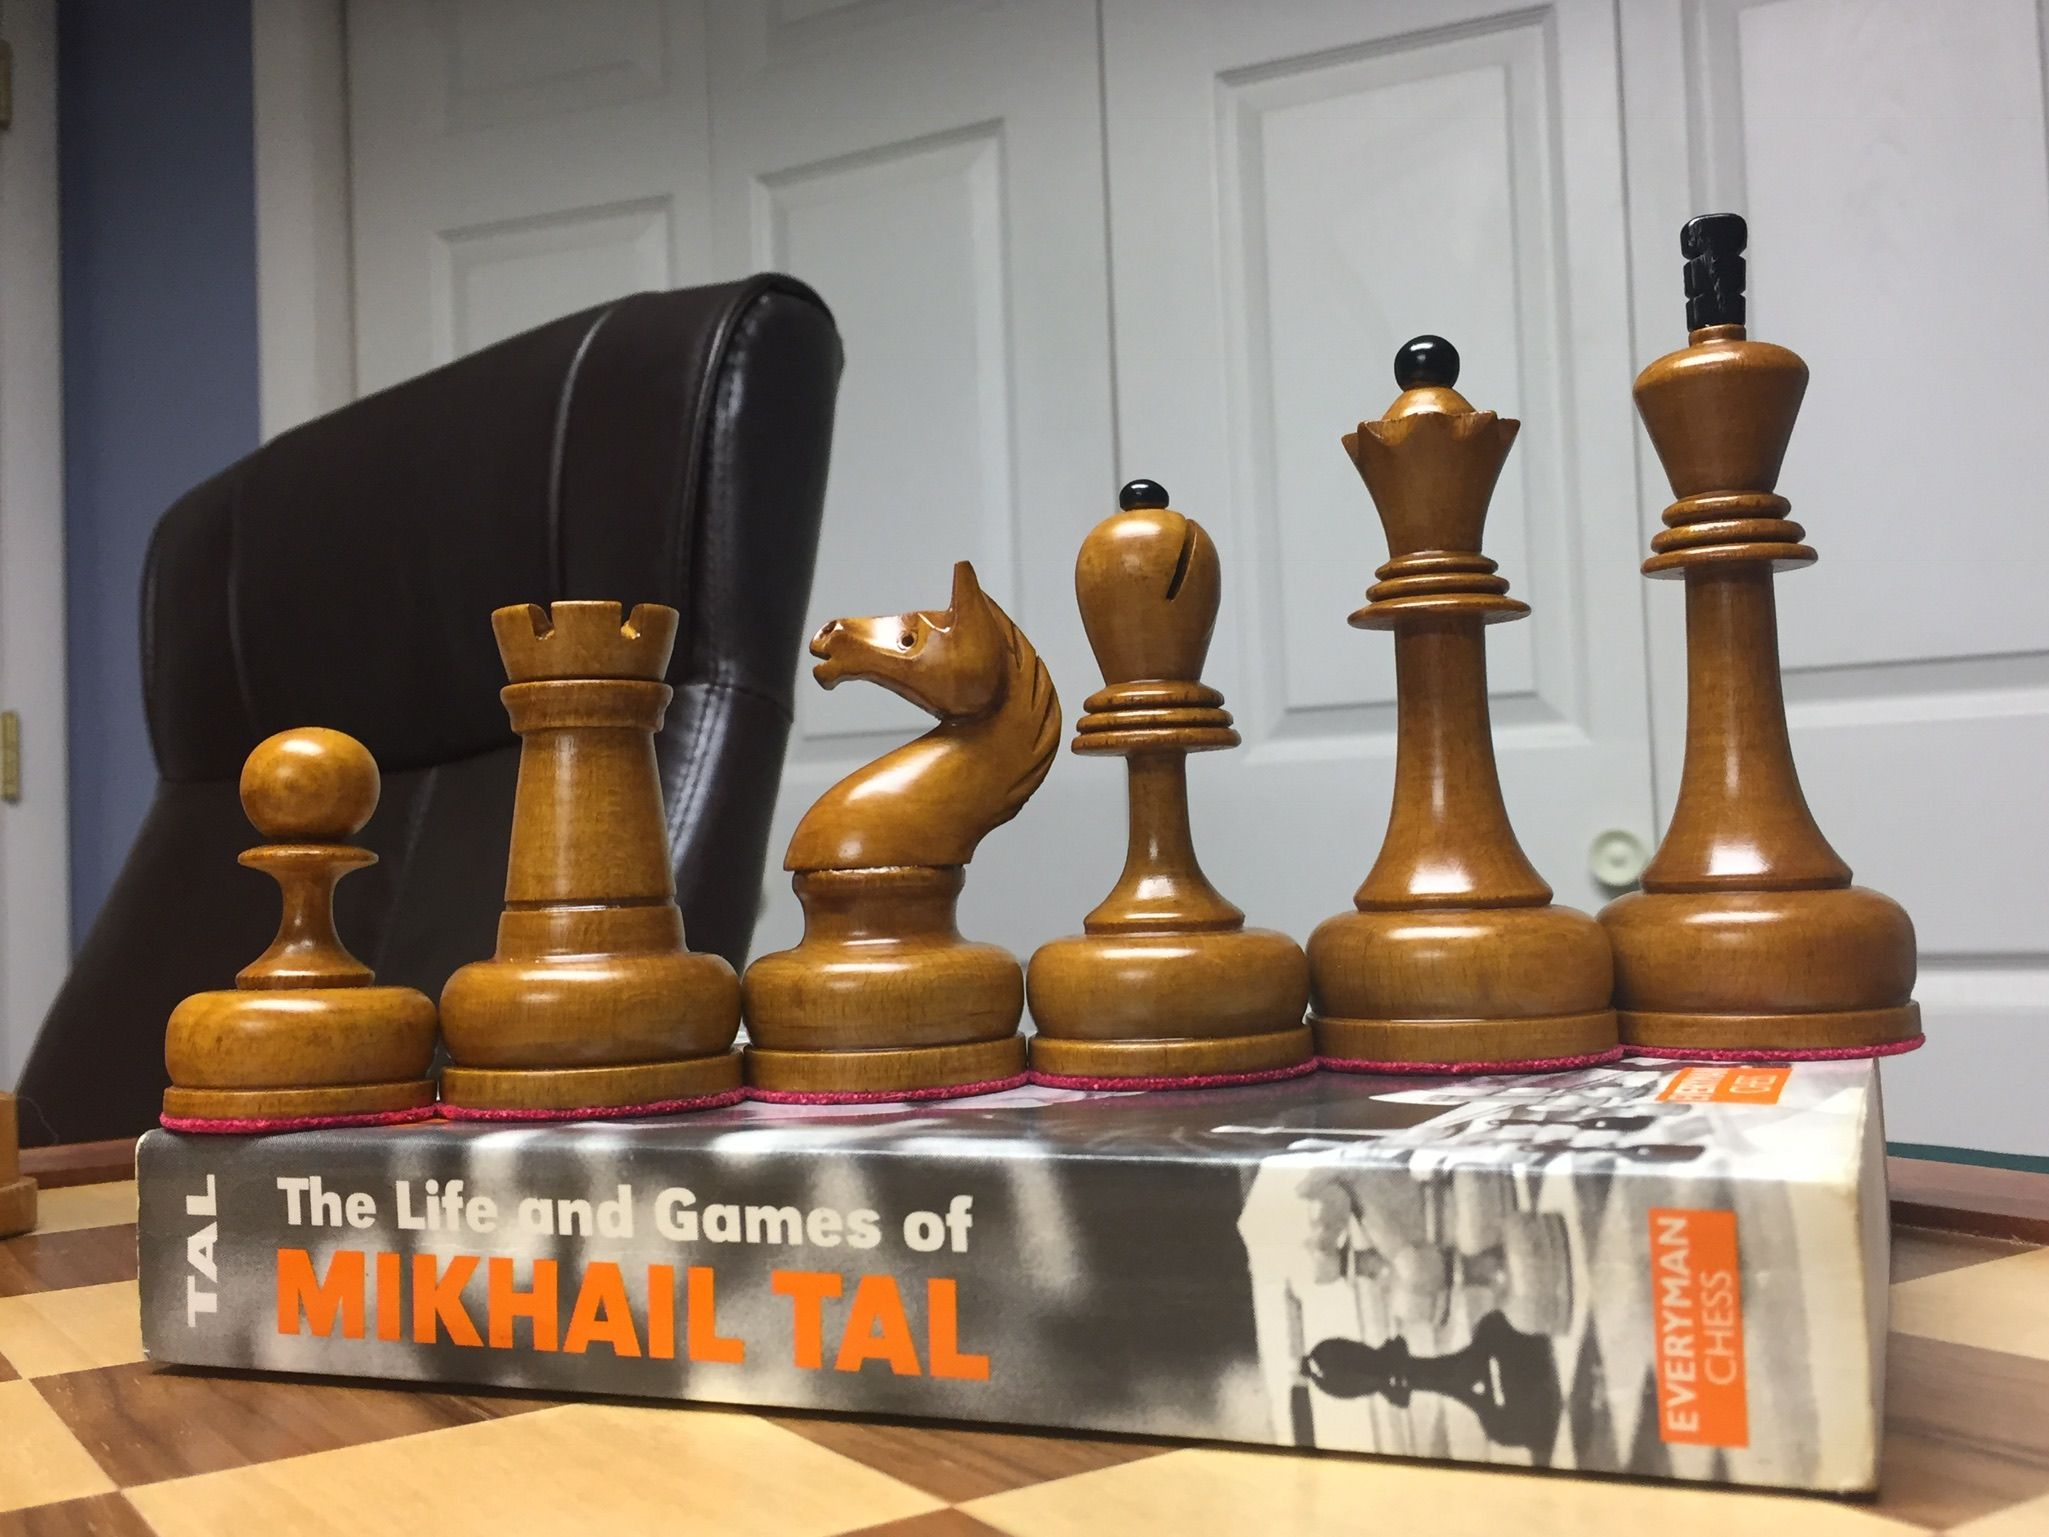 Life & Games of Mikhail Tal by Tal, Mikhail